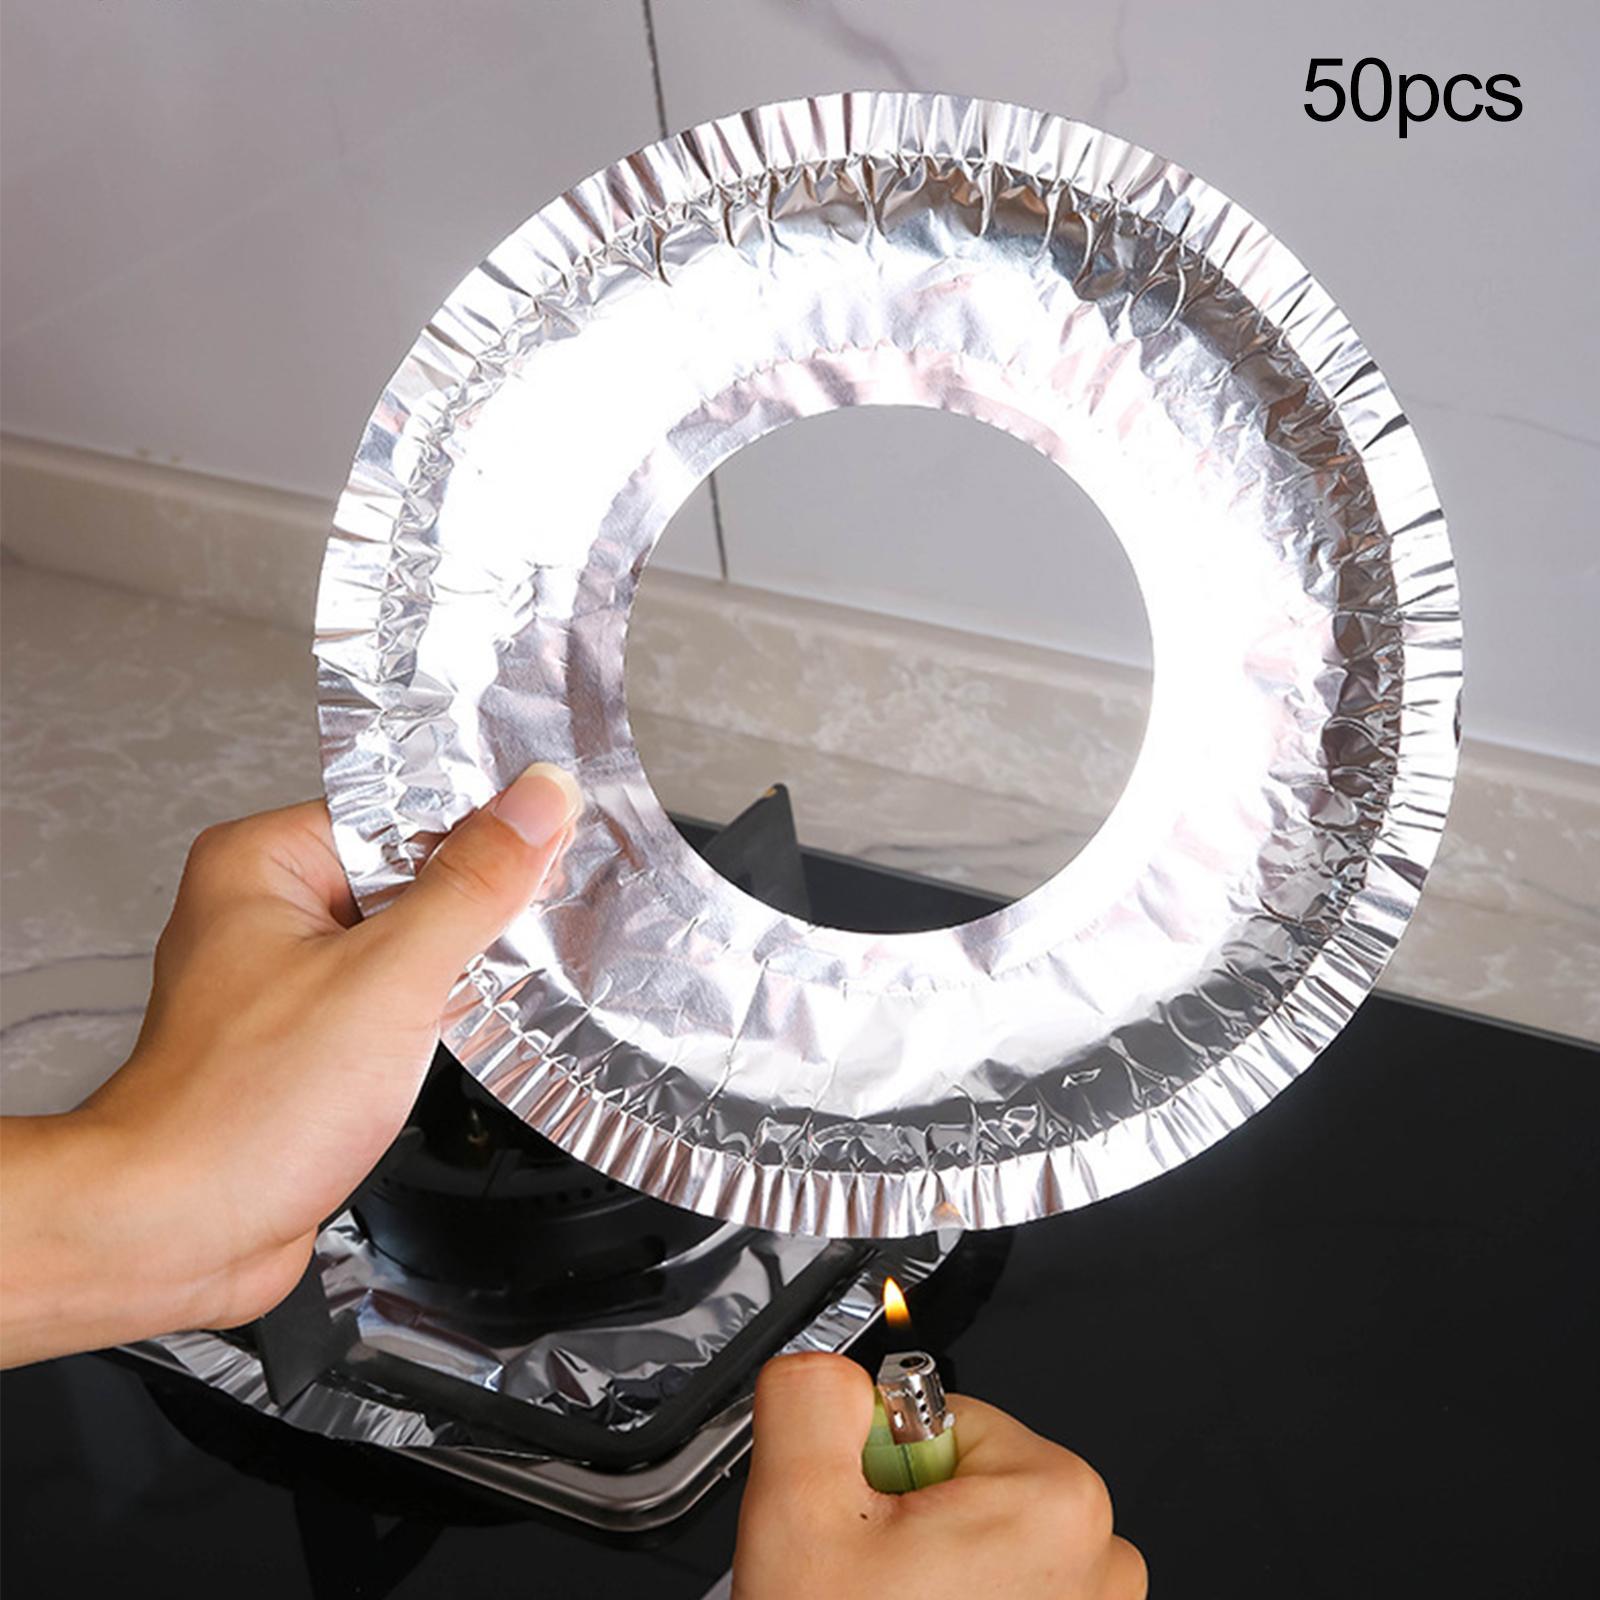 50Pcs Electric  Burner Covers Foil Burner Liners, Easy to Use, Keep Electric Range  Clean Disposable  Top Protector for Kitchen